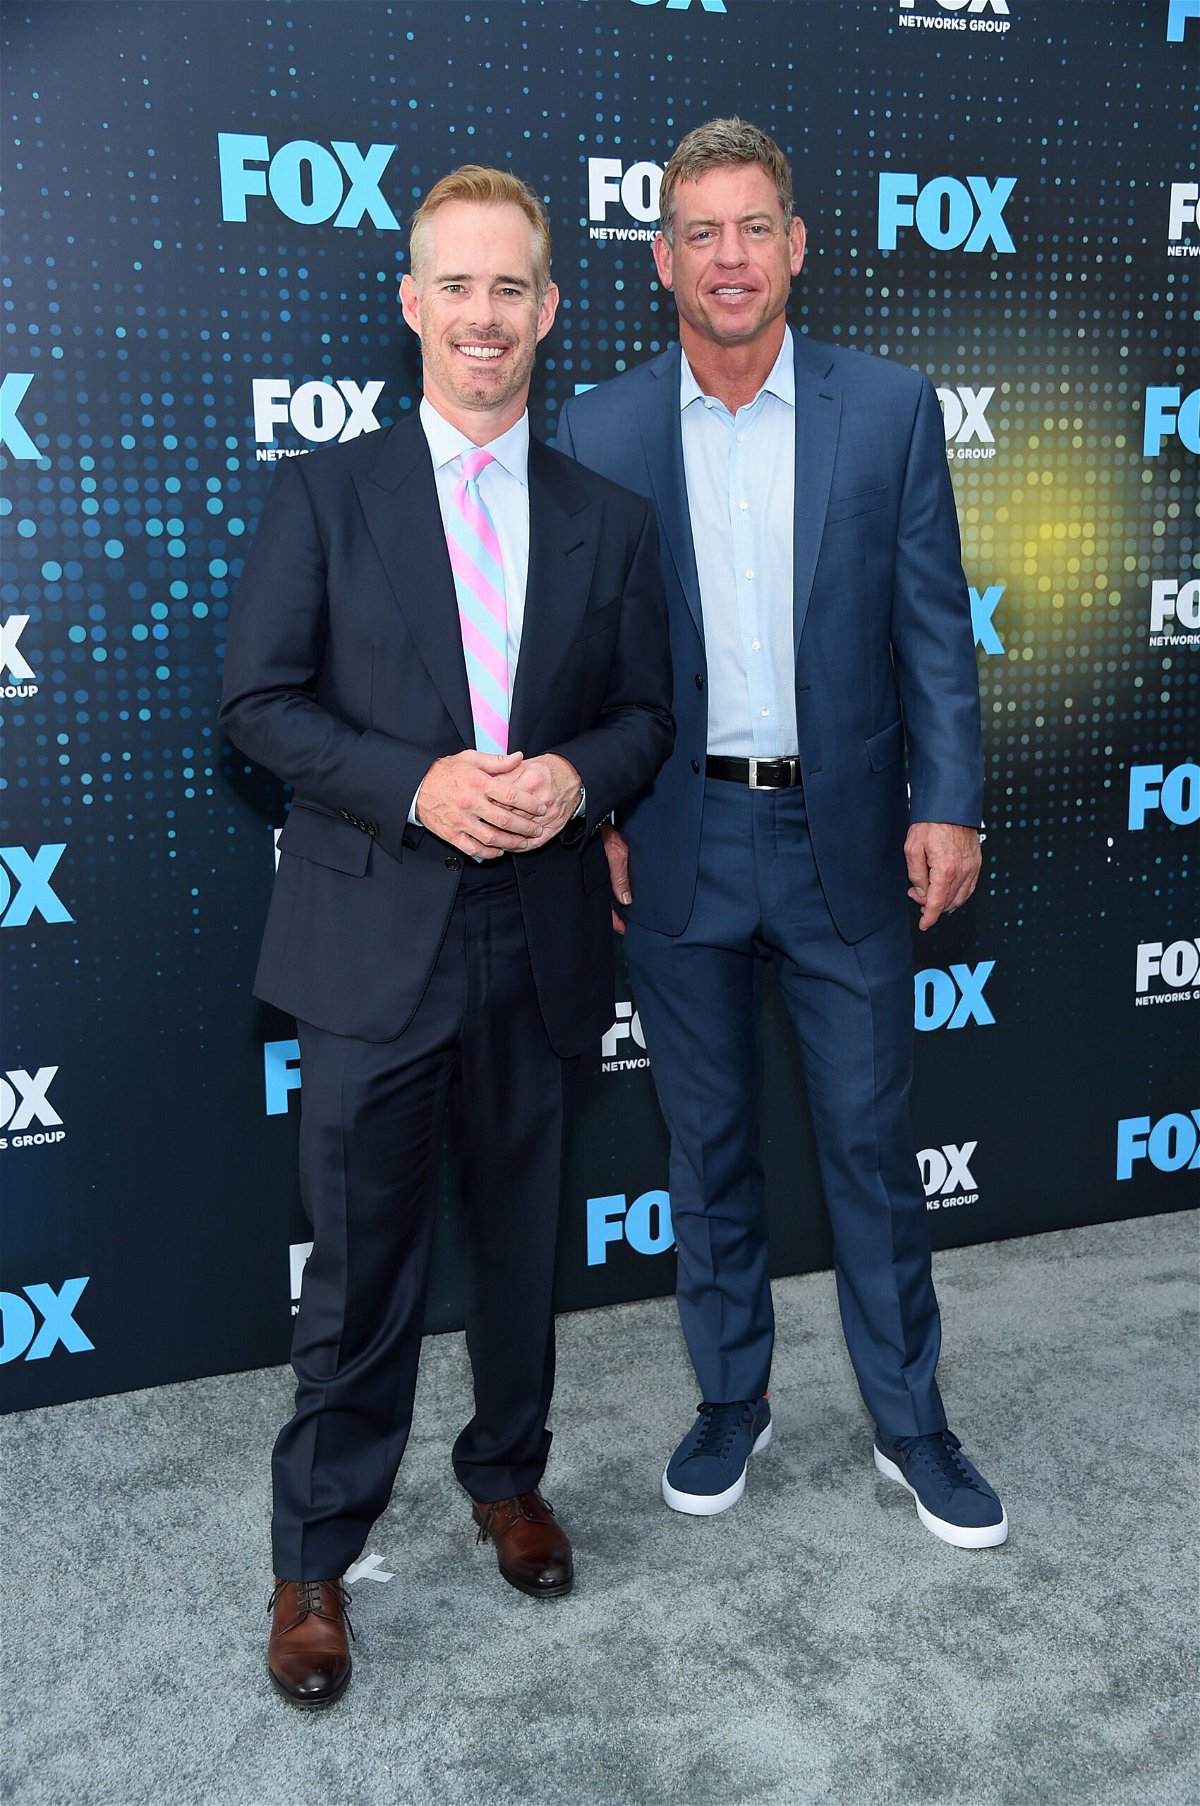 <i>Michael Loccisano/Getty Images</i><br/>Joe Buck (left) and Troy Aikman